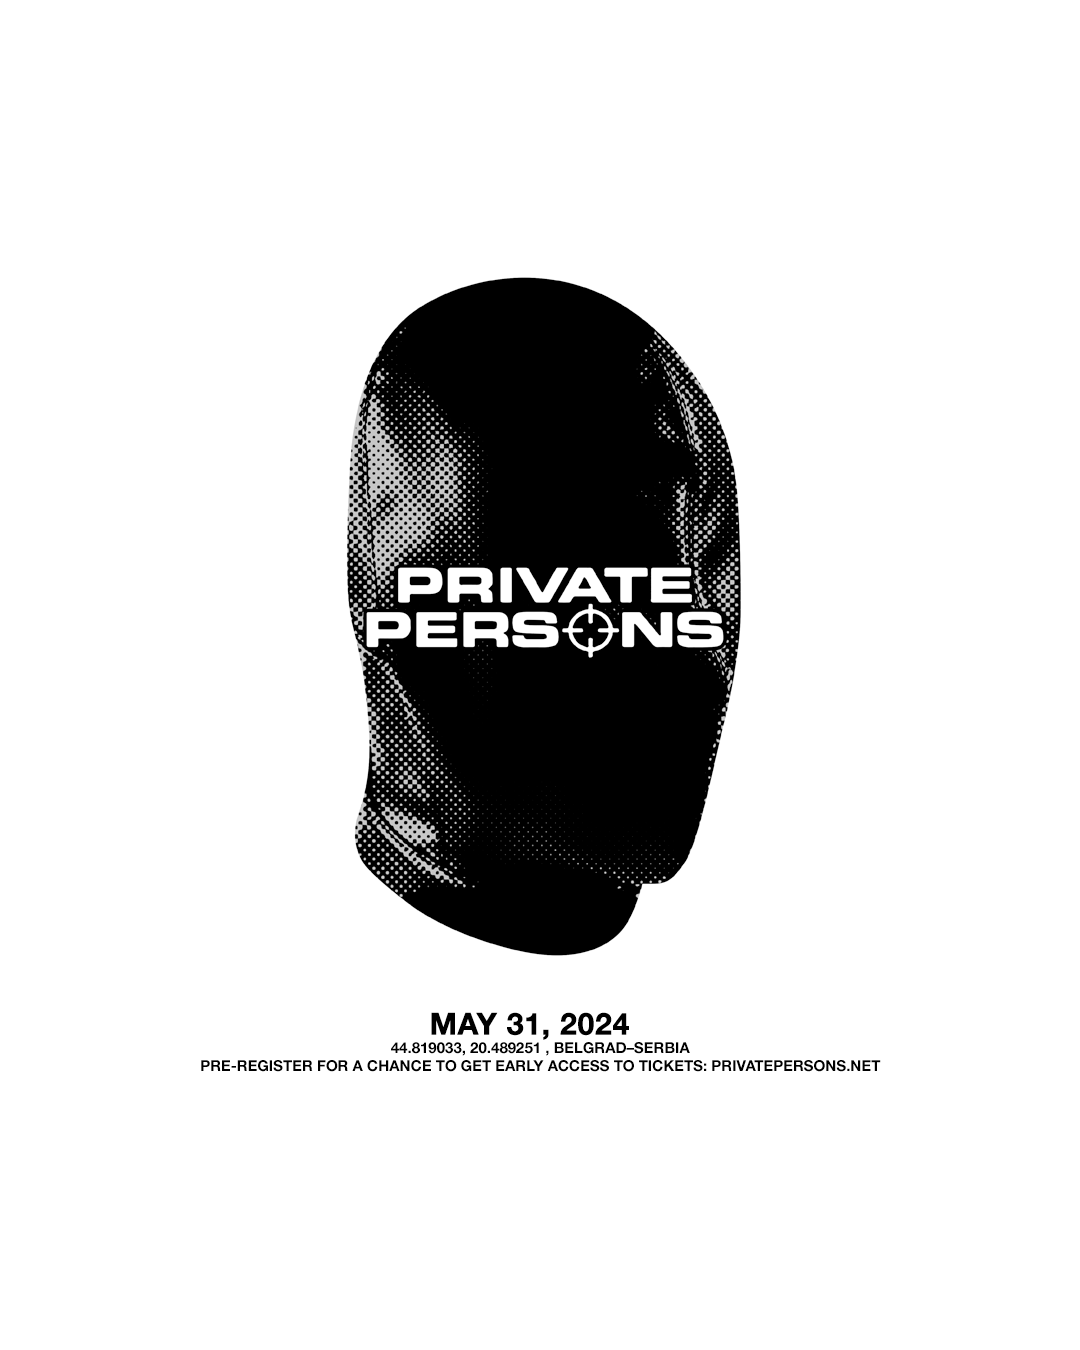 PRIVATE PERSONS - Página frontal